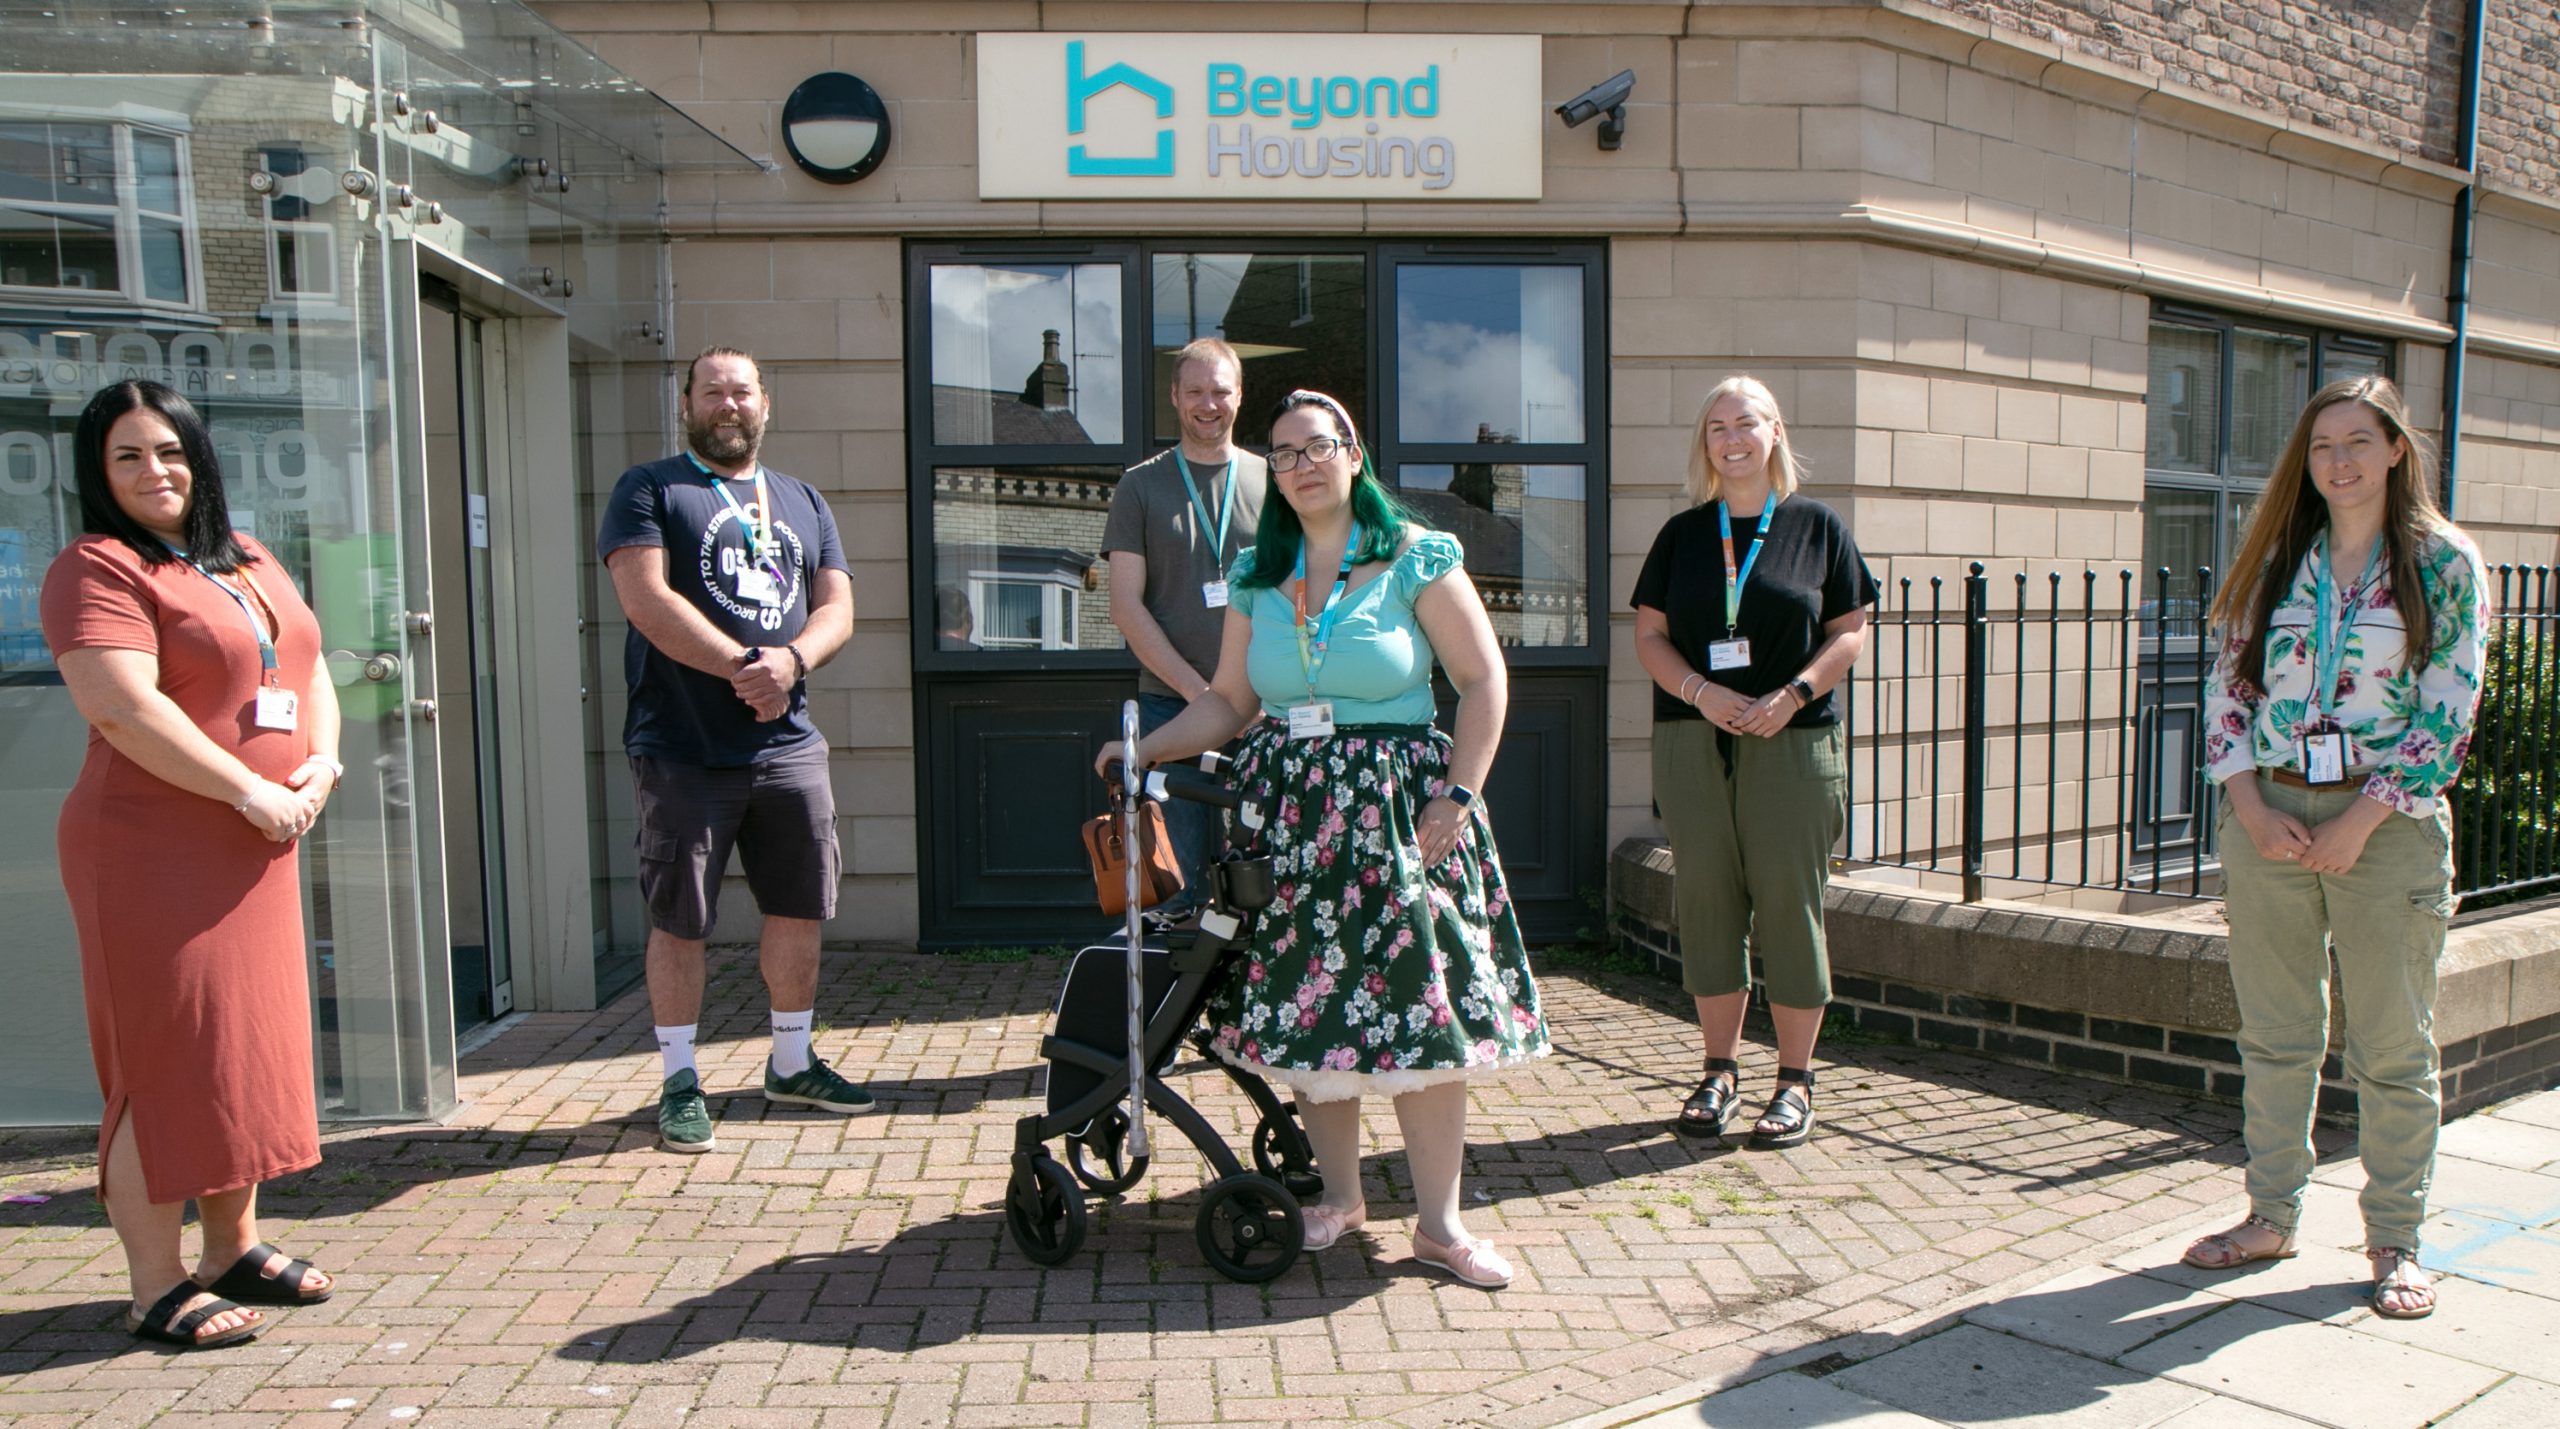 http://Beyond%20Housing%20named%20among%20the%20UK’s%20top%20most%20inclusive%20organisations%20to%20work%20for